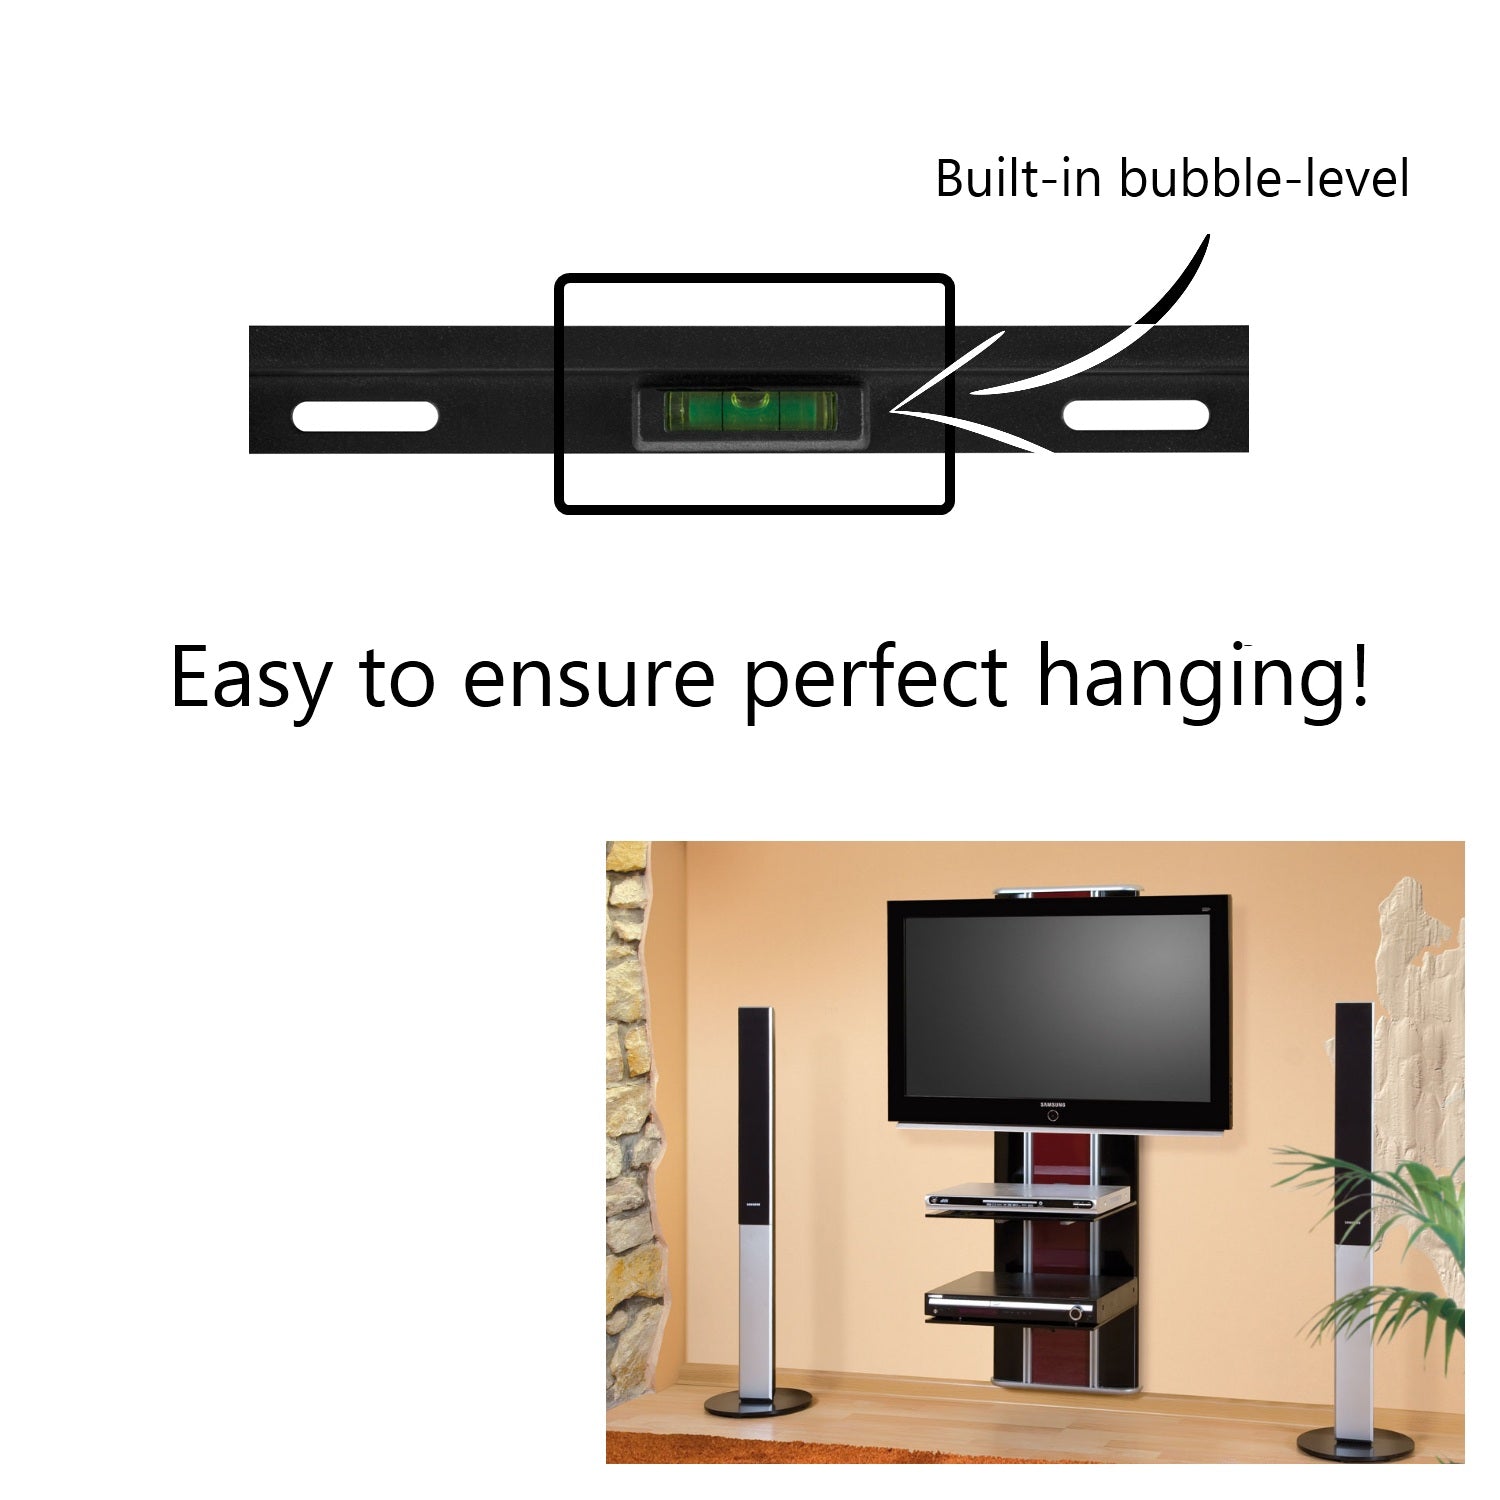 Deco Mount Slim FLAT Wall Mount Bundle for 19 to 45 inch TV's with Built-in Bubble Leveler, 2 HDMI Cables, Screen Cleaning Kit, and More - Deco Gear